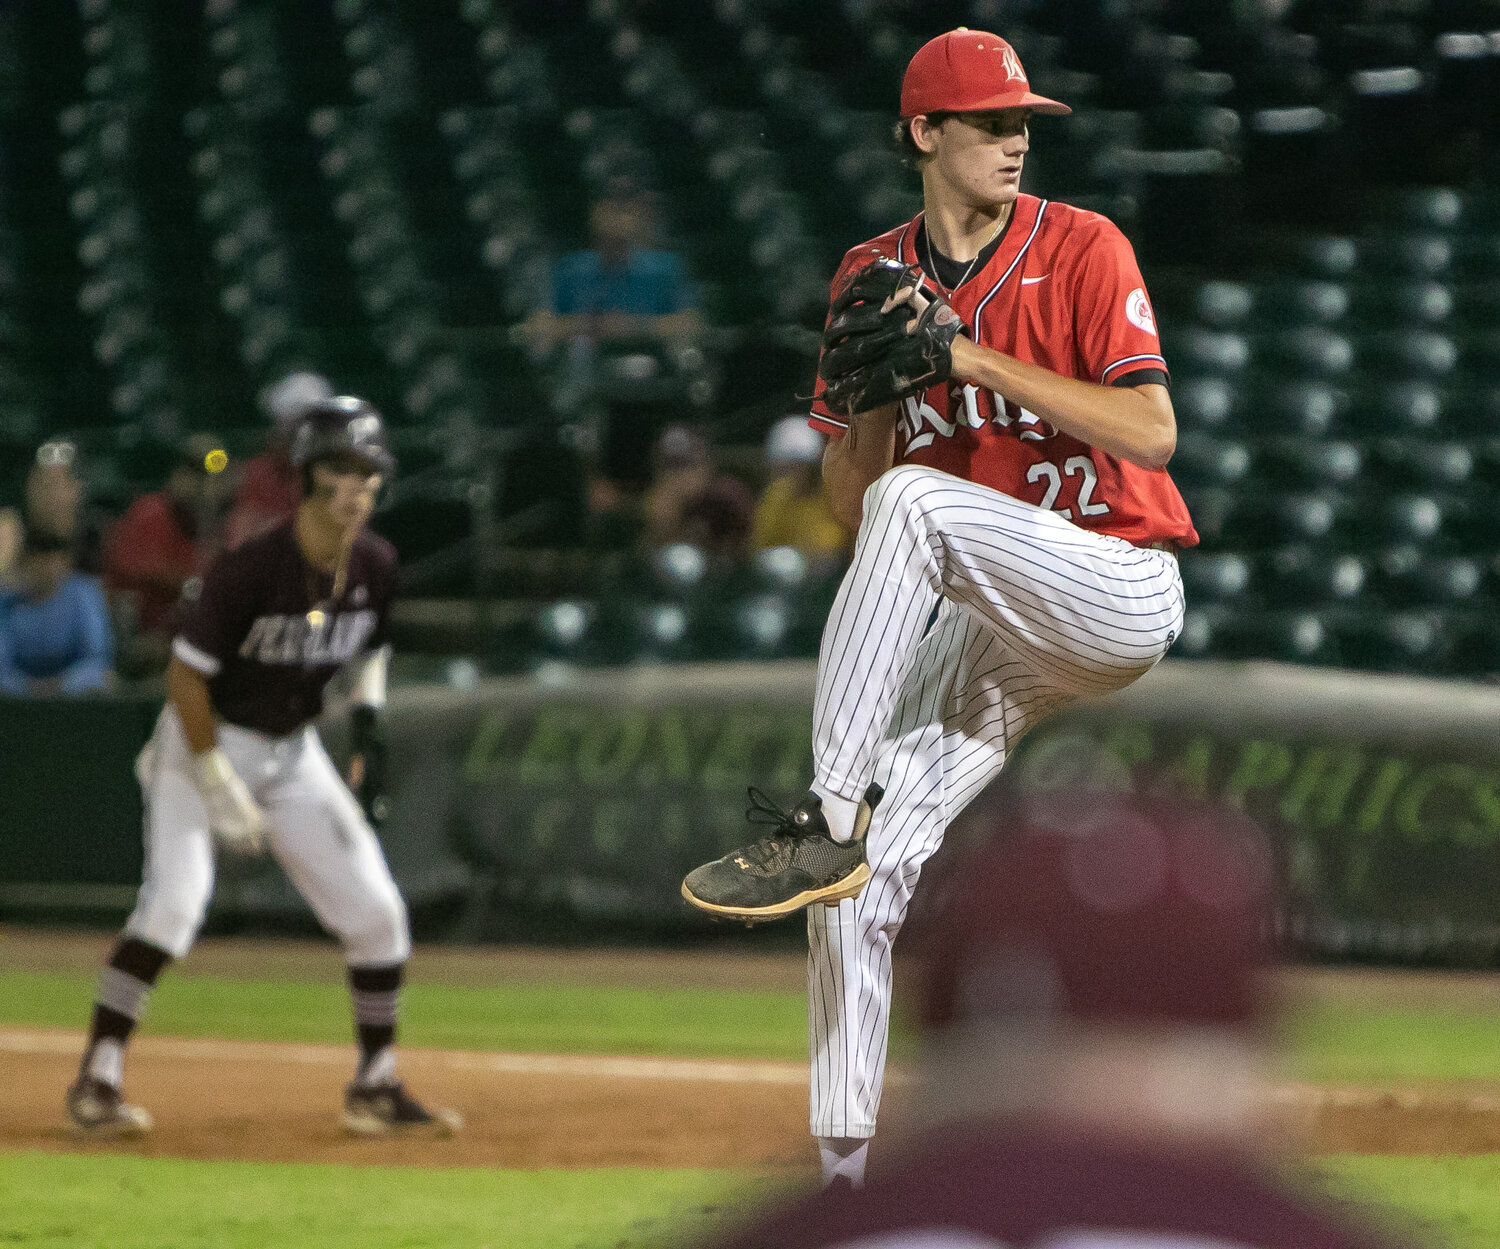 Cade Nelson pitches during Friday's Regional Final between Katy and Pearland at Constellation Field in Sugar Land.